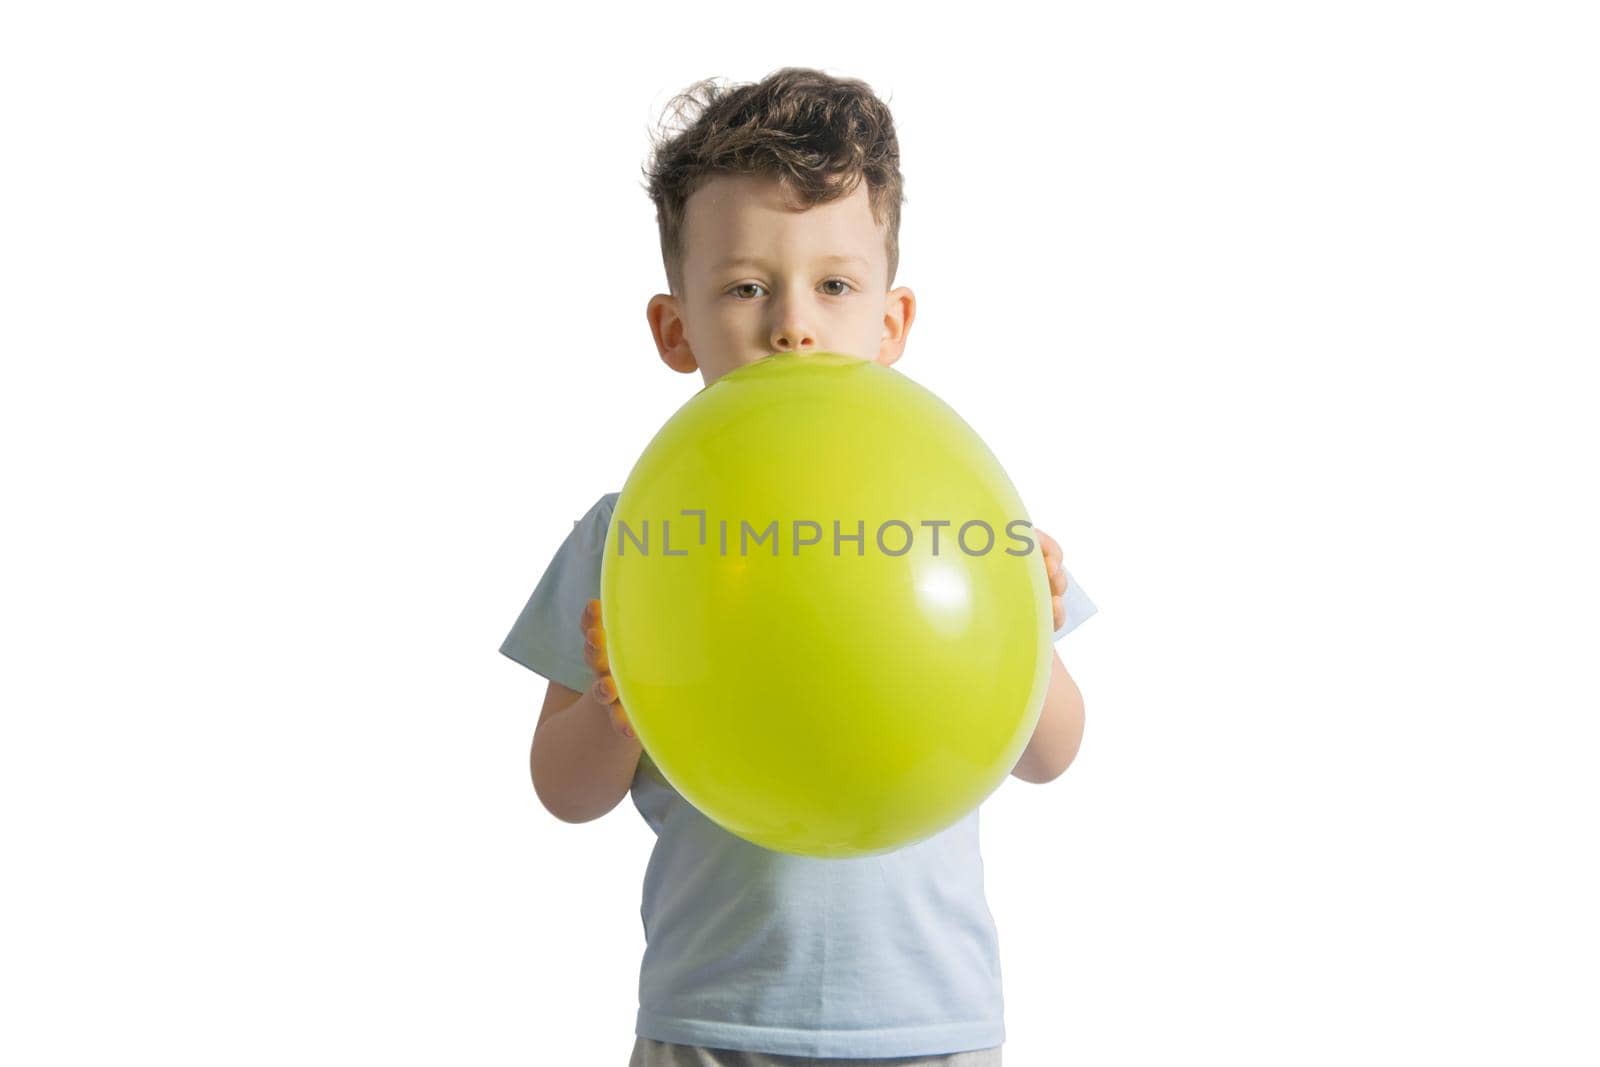 Funny boy blowing up a yellow balloon isolated on white background by uspmen